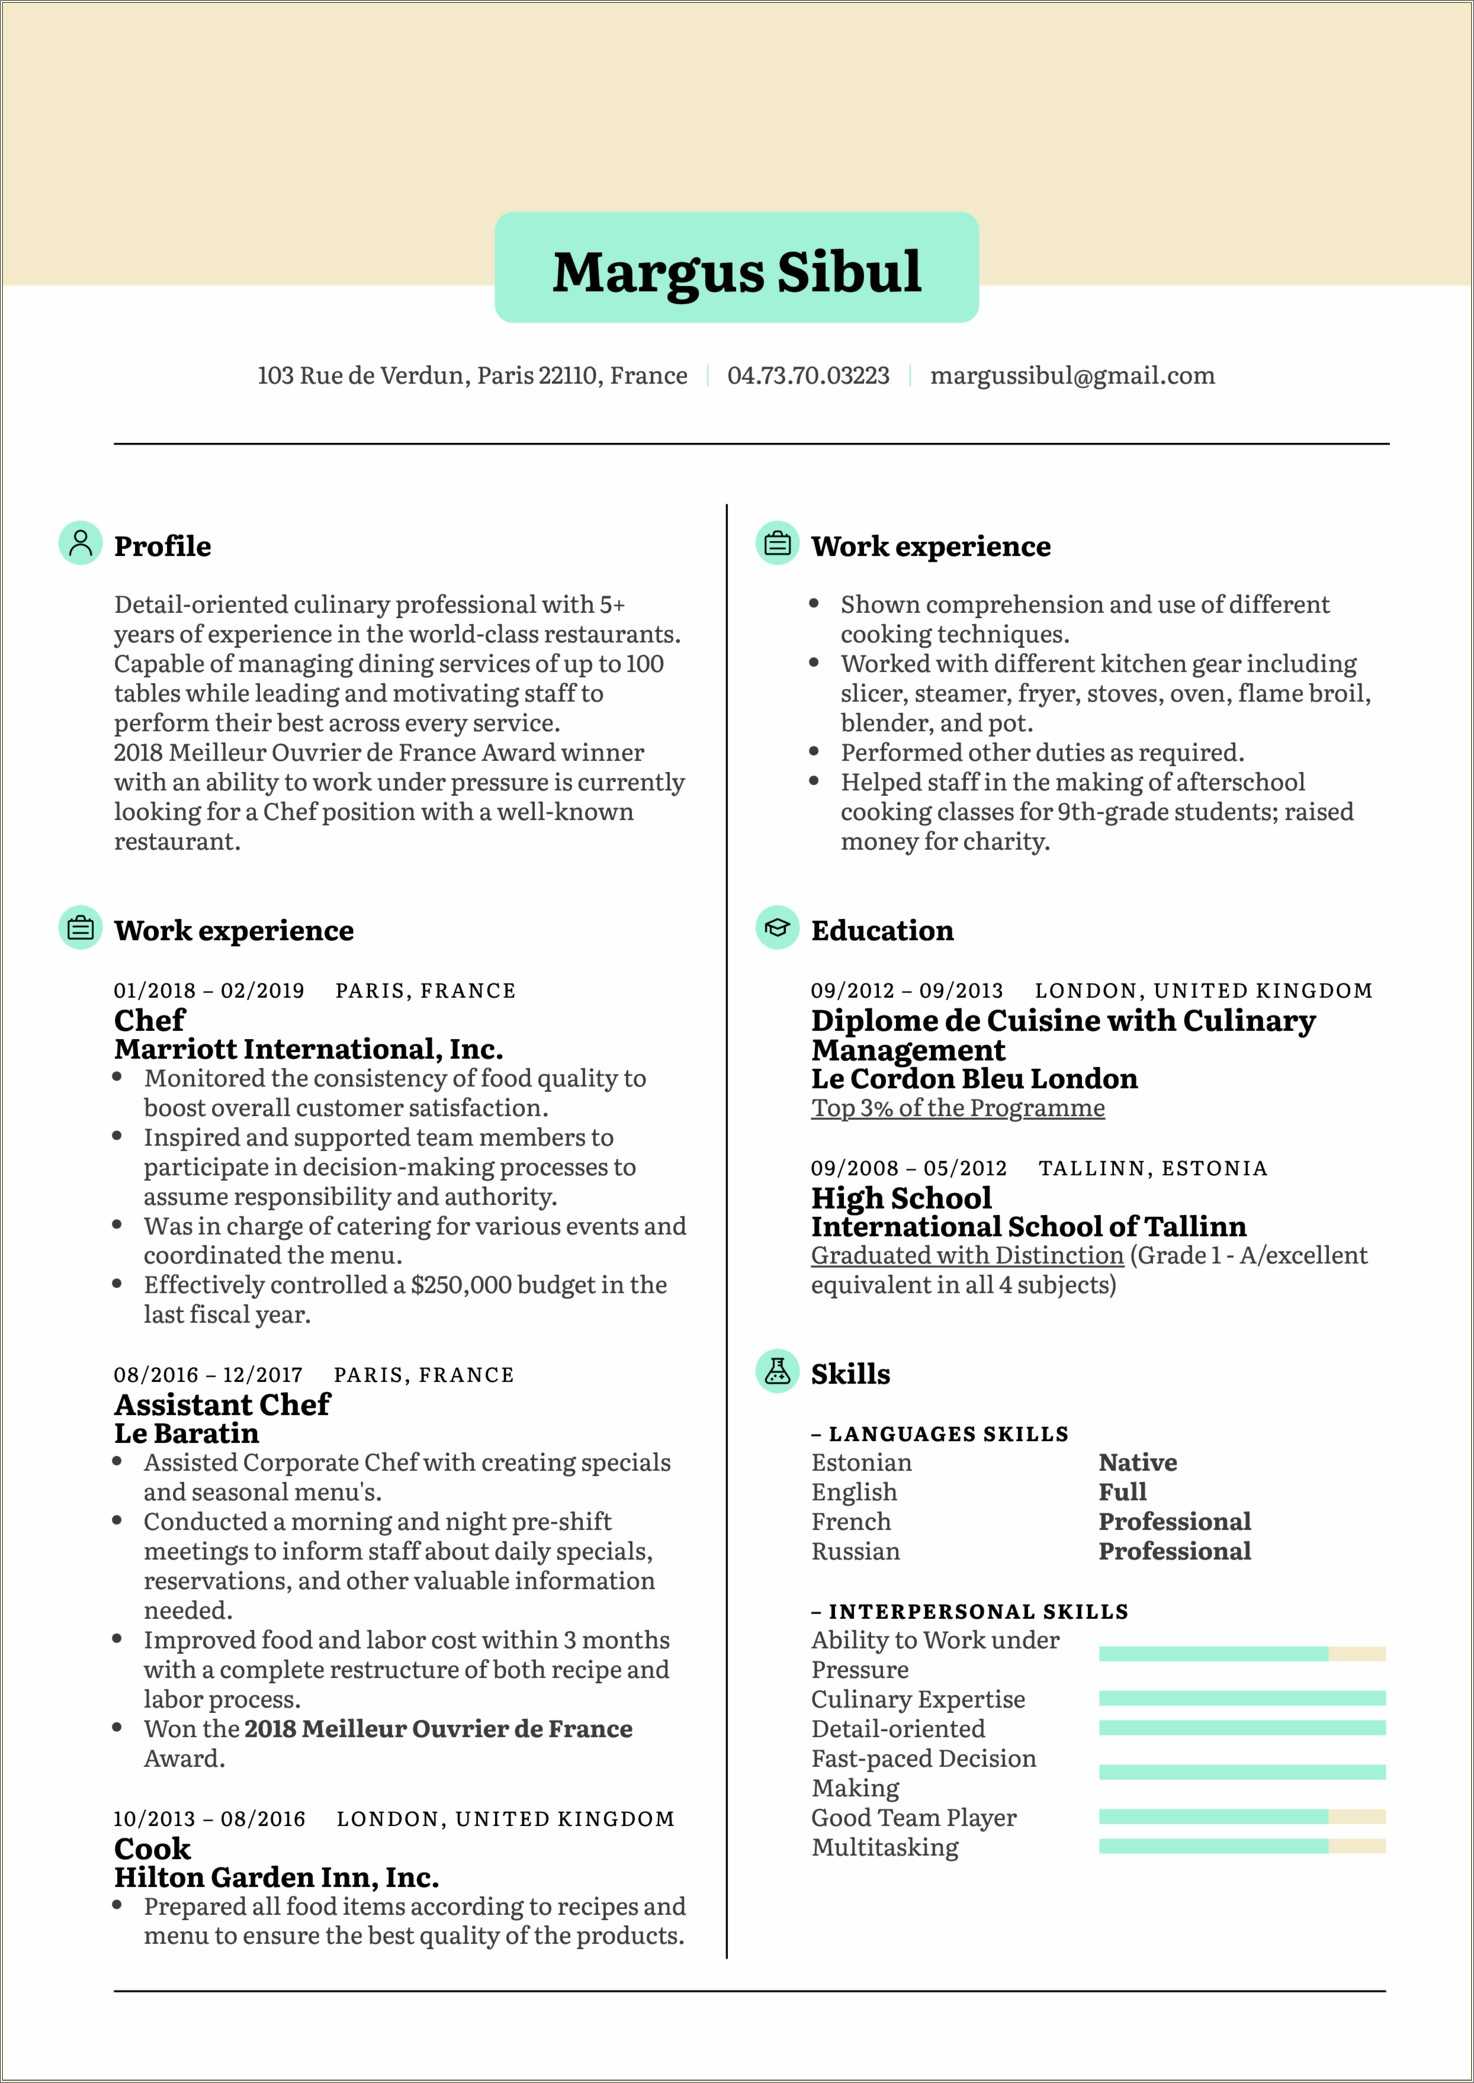 Resume Examples Of Fast Food Restaurants - Resume Example Gallery